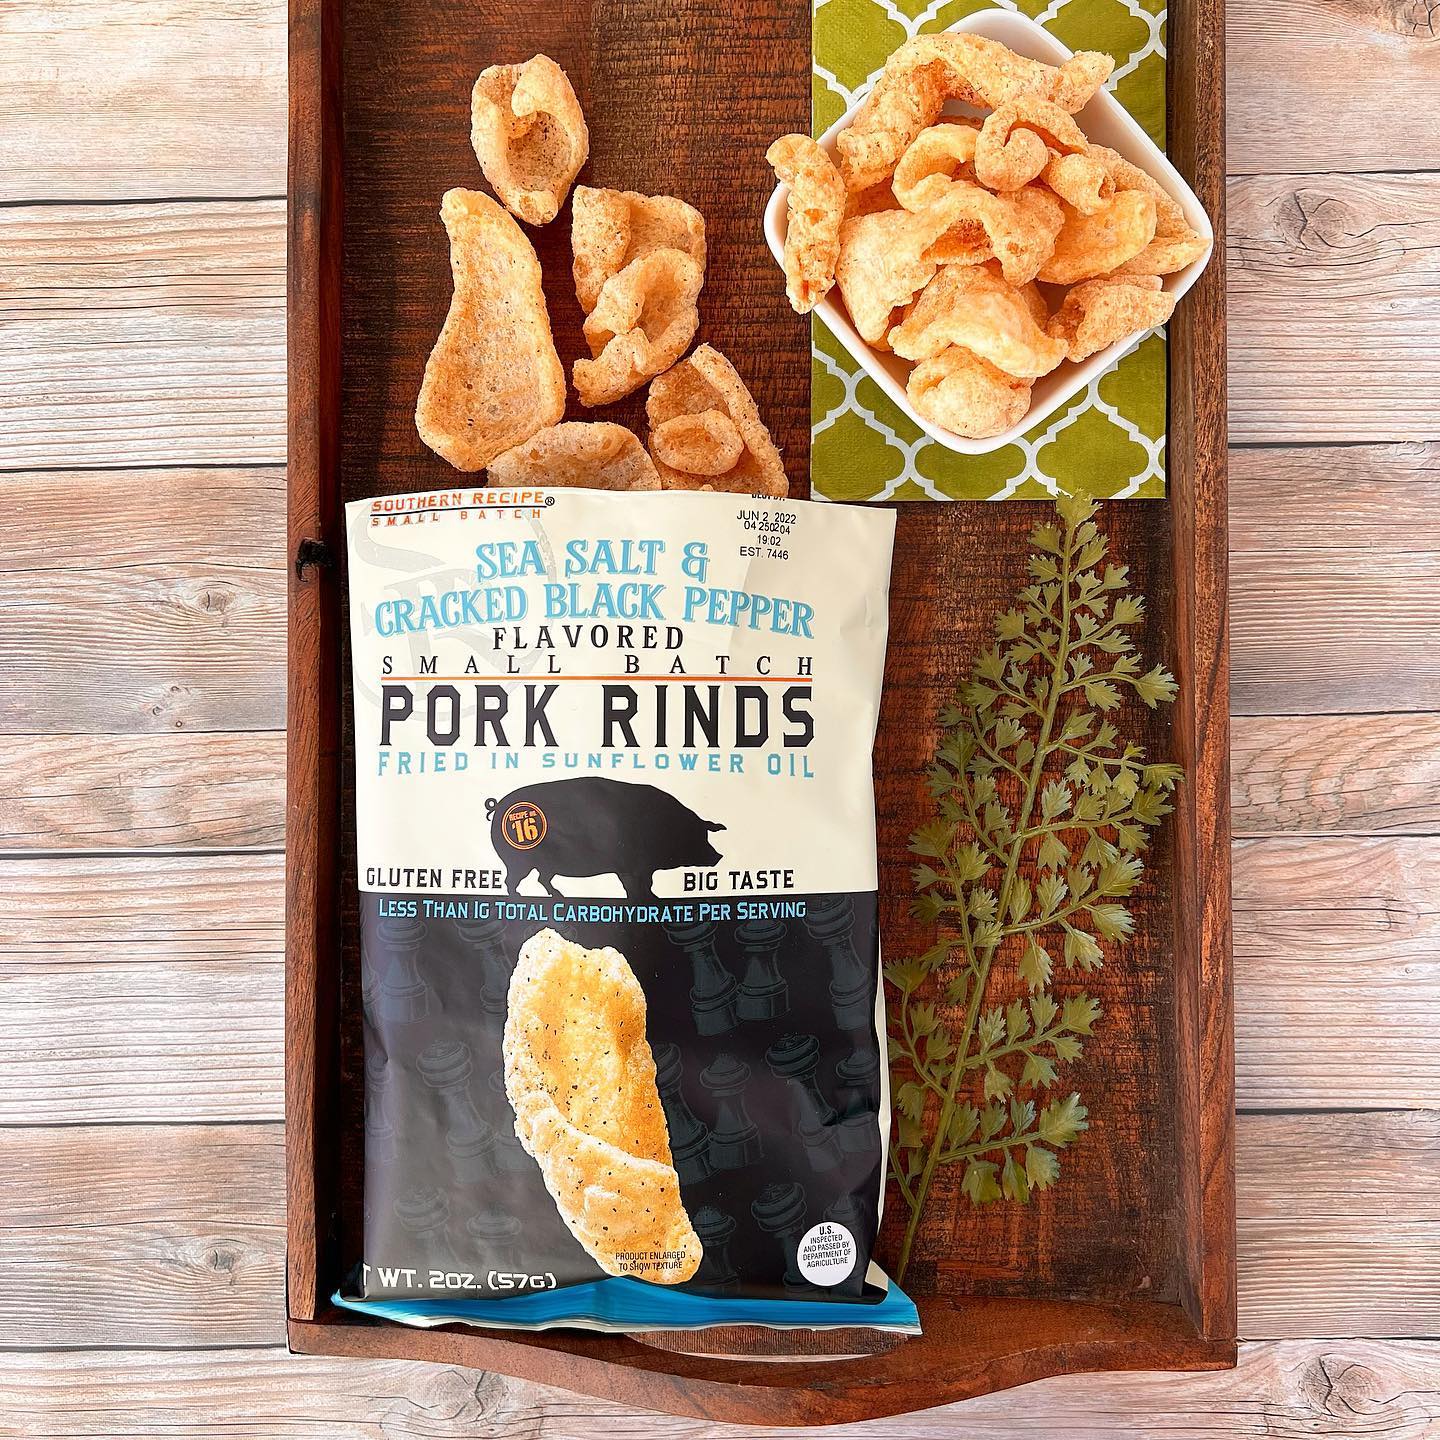 Pork rinds are a healthy part of a balanced diet